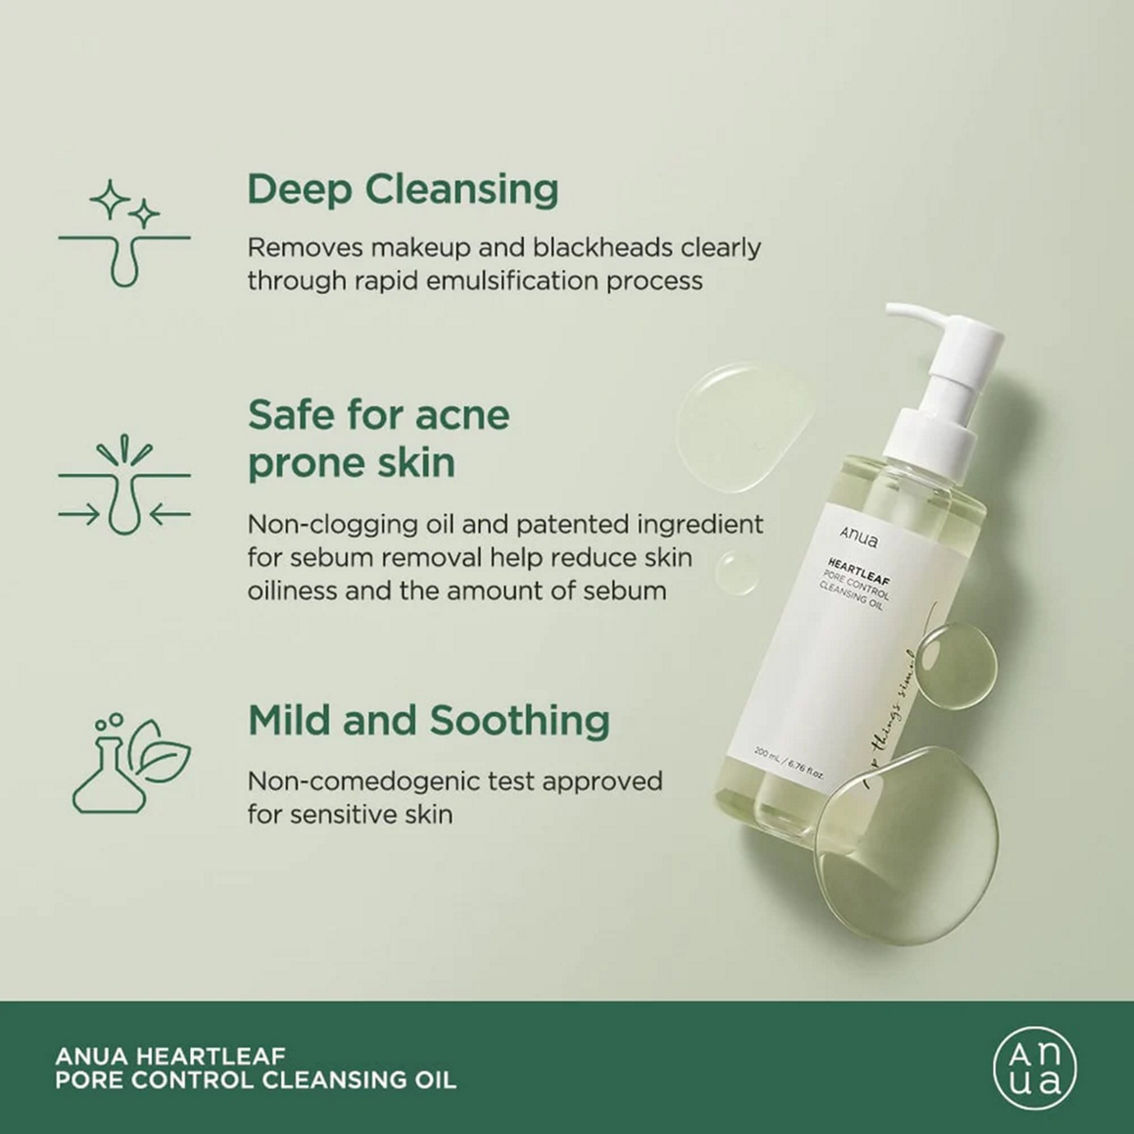 ANUA Heartleaf Pore Control Cleansing Oil 200 ml - Image 2 of 4